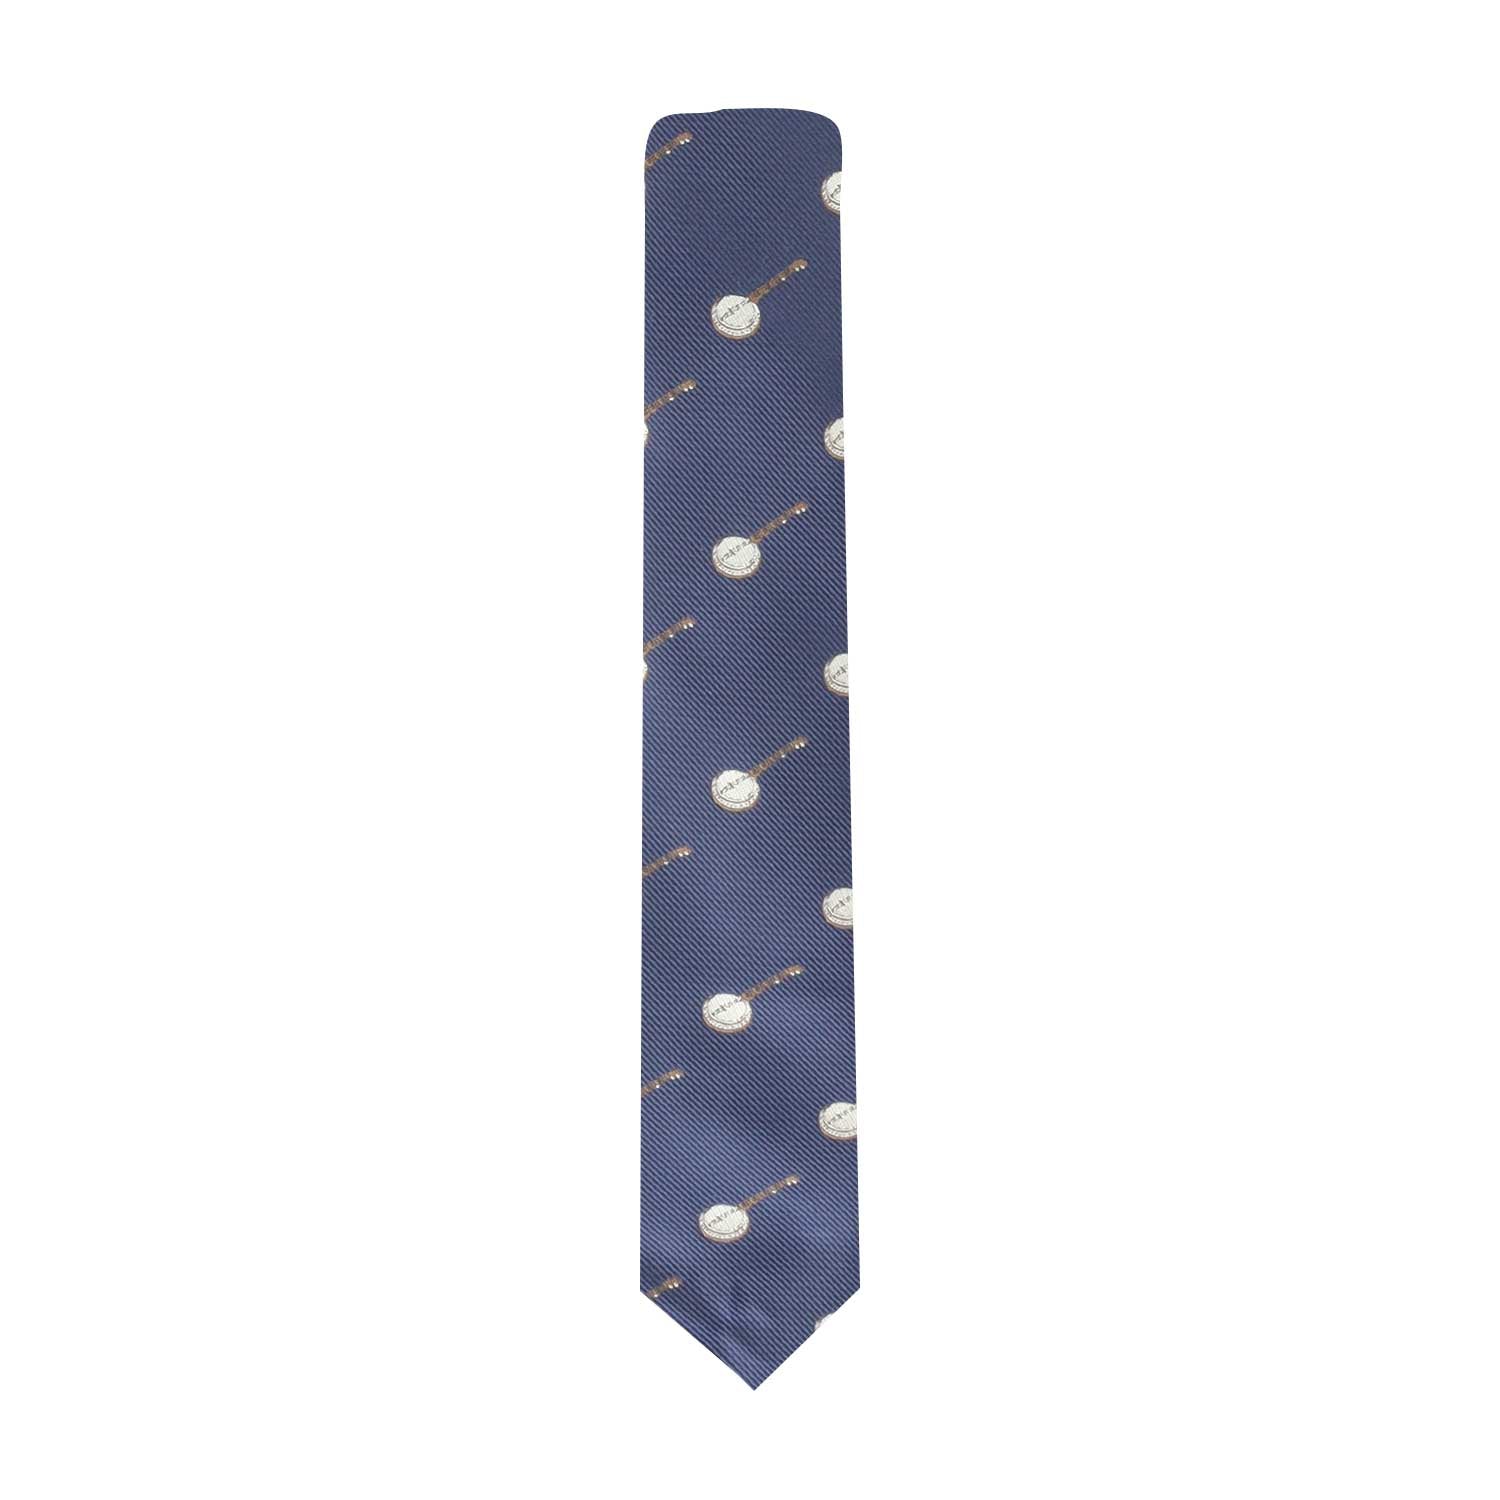 A Banjo Skinny Tie with golf balls on it, adding sophistication to your outfit.